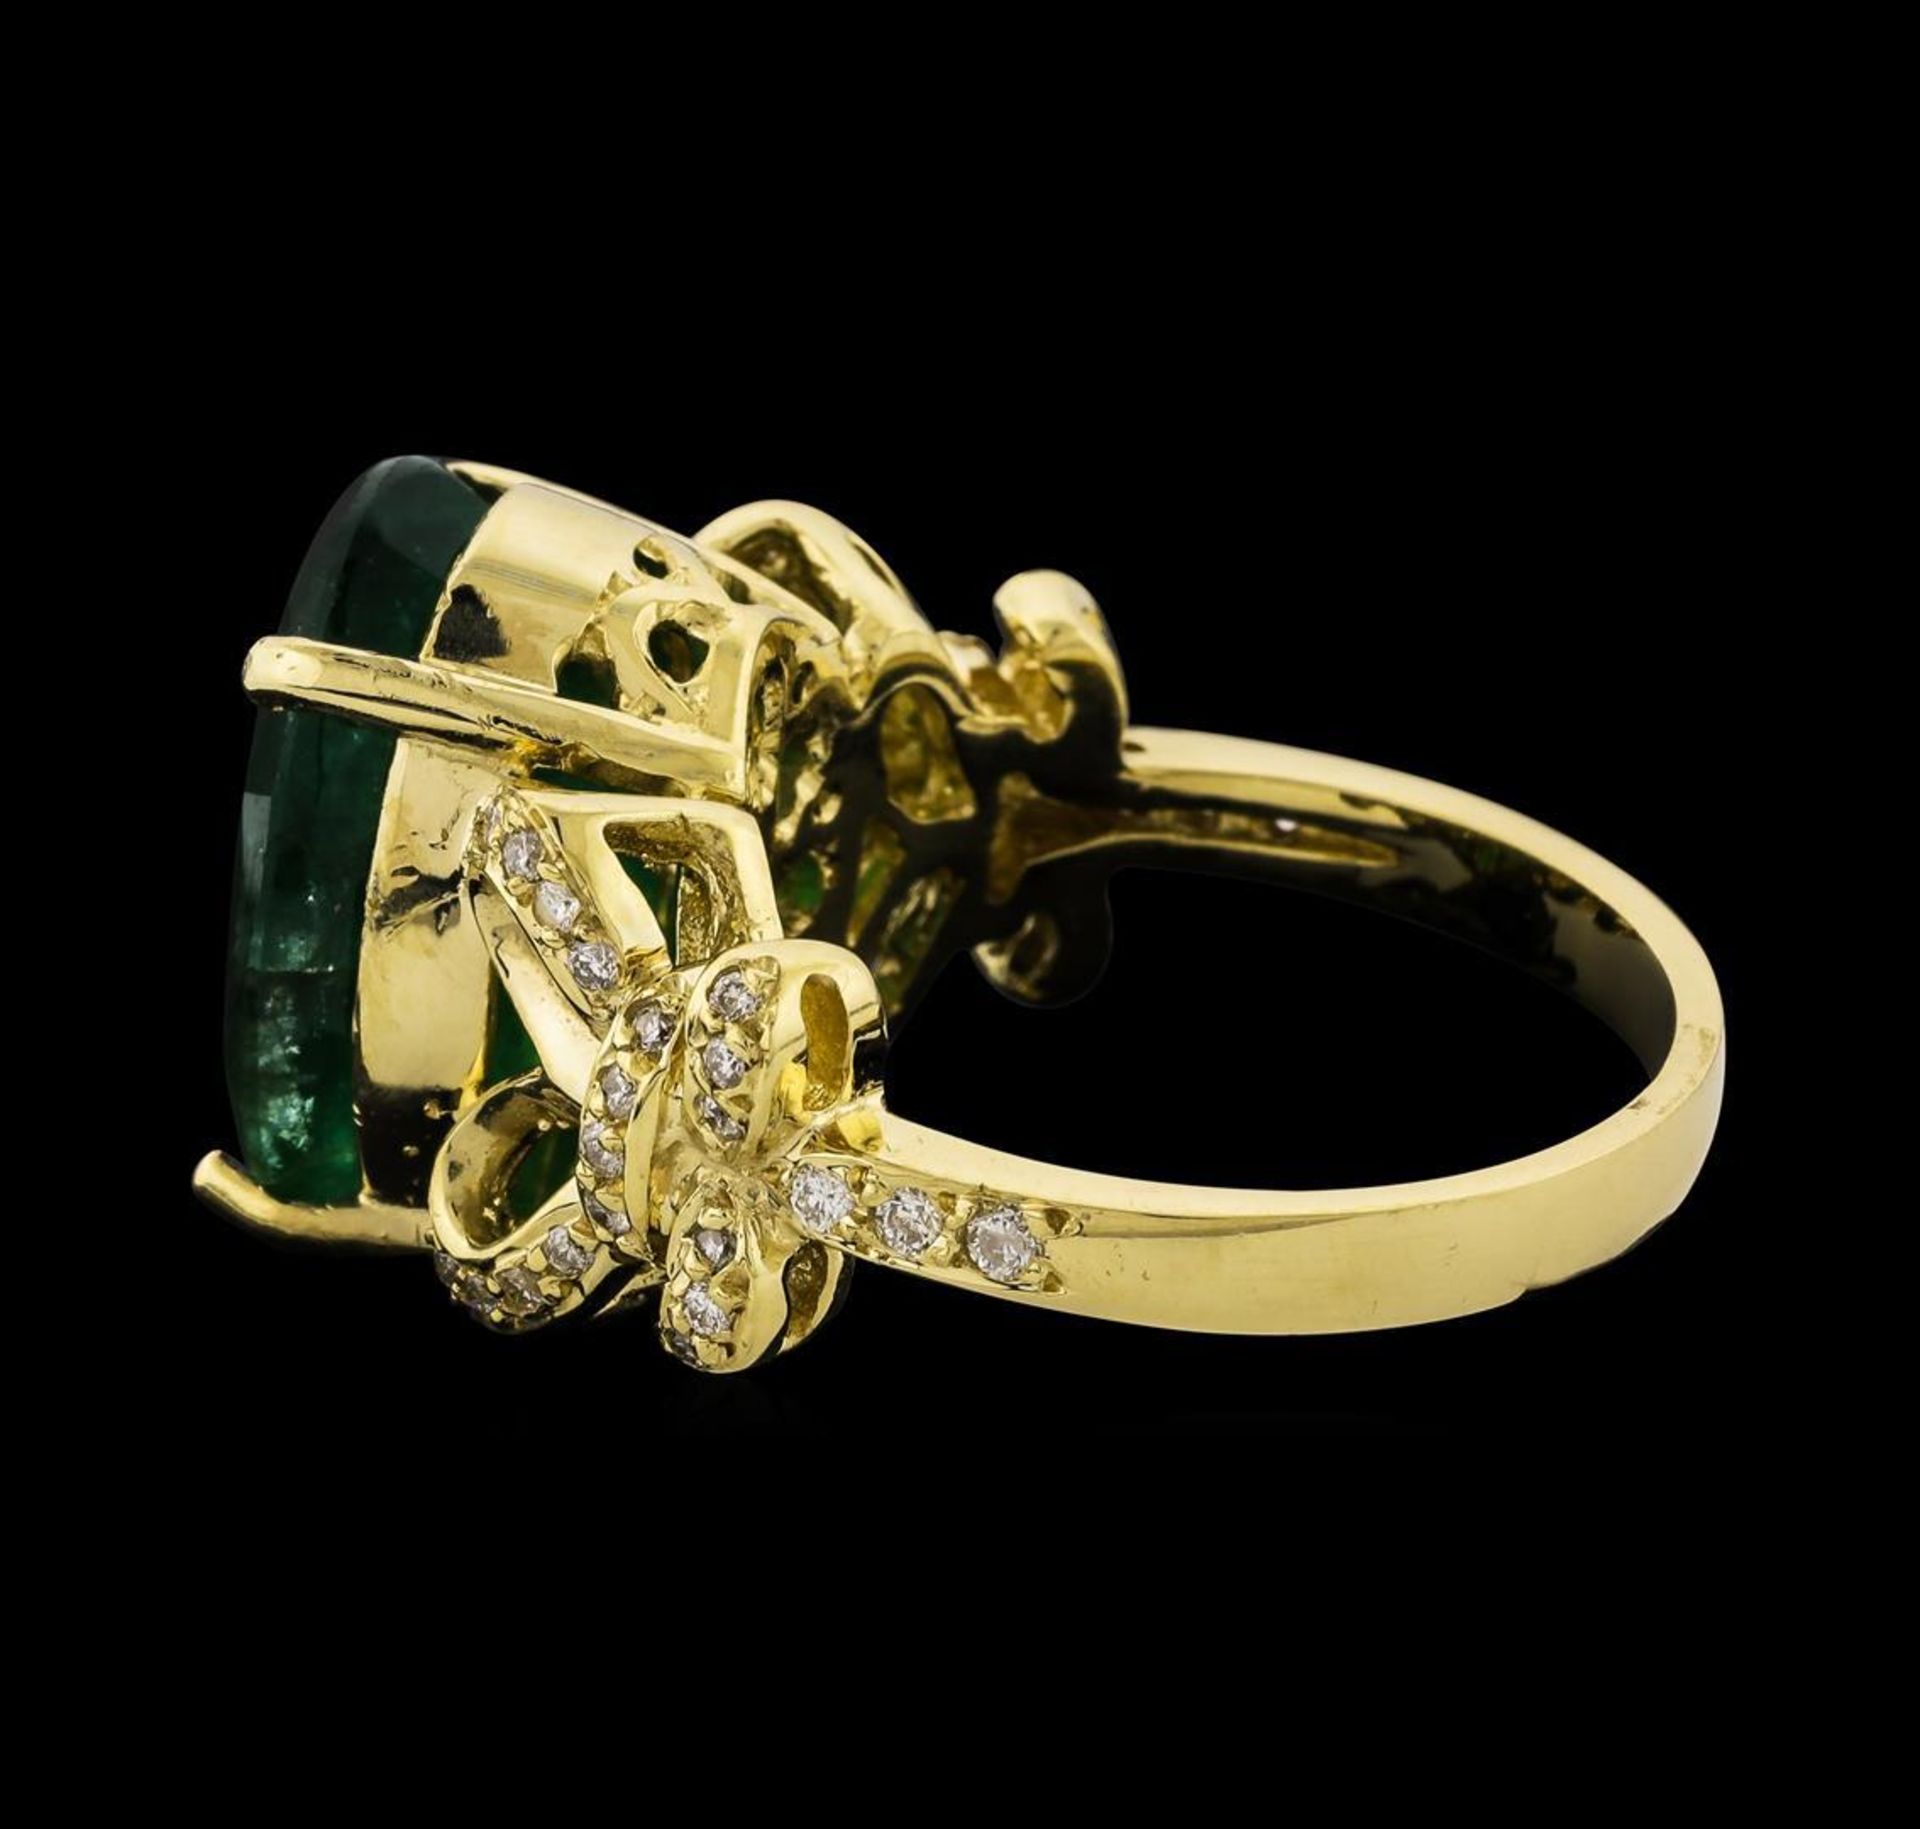 8.71 ctw Emerald and Diamond Ring - 14KT Yellow Gold - Image 3 of 5